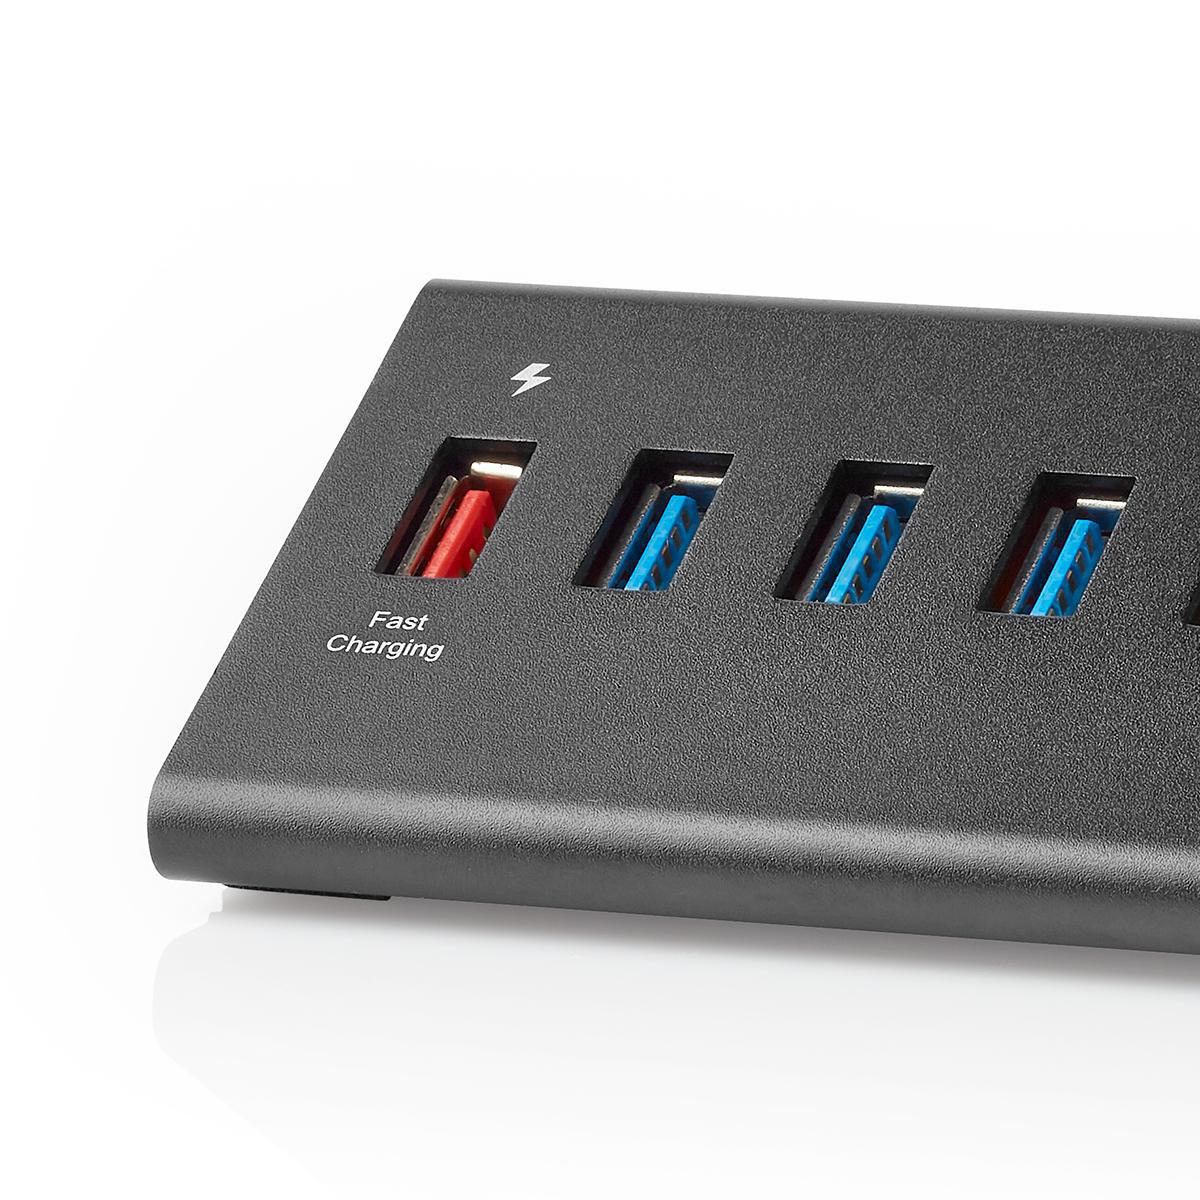 DFCHT USB Hub 3.0 High-Speed Data Transmission Hub Compatible with Mac OS,Windows 7/8/10,Google Chrome OS and More 5-Port USB Docking Station with 1 USB 3.0 Ports and 1 USB 2.0 Ports